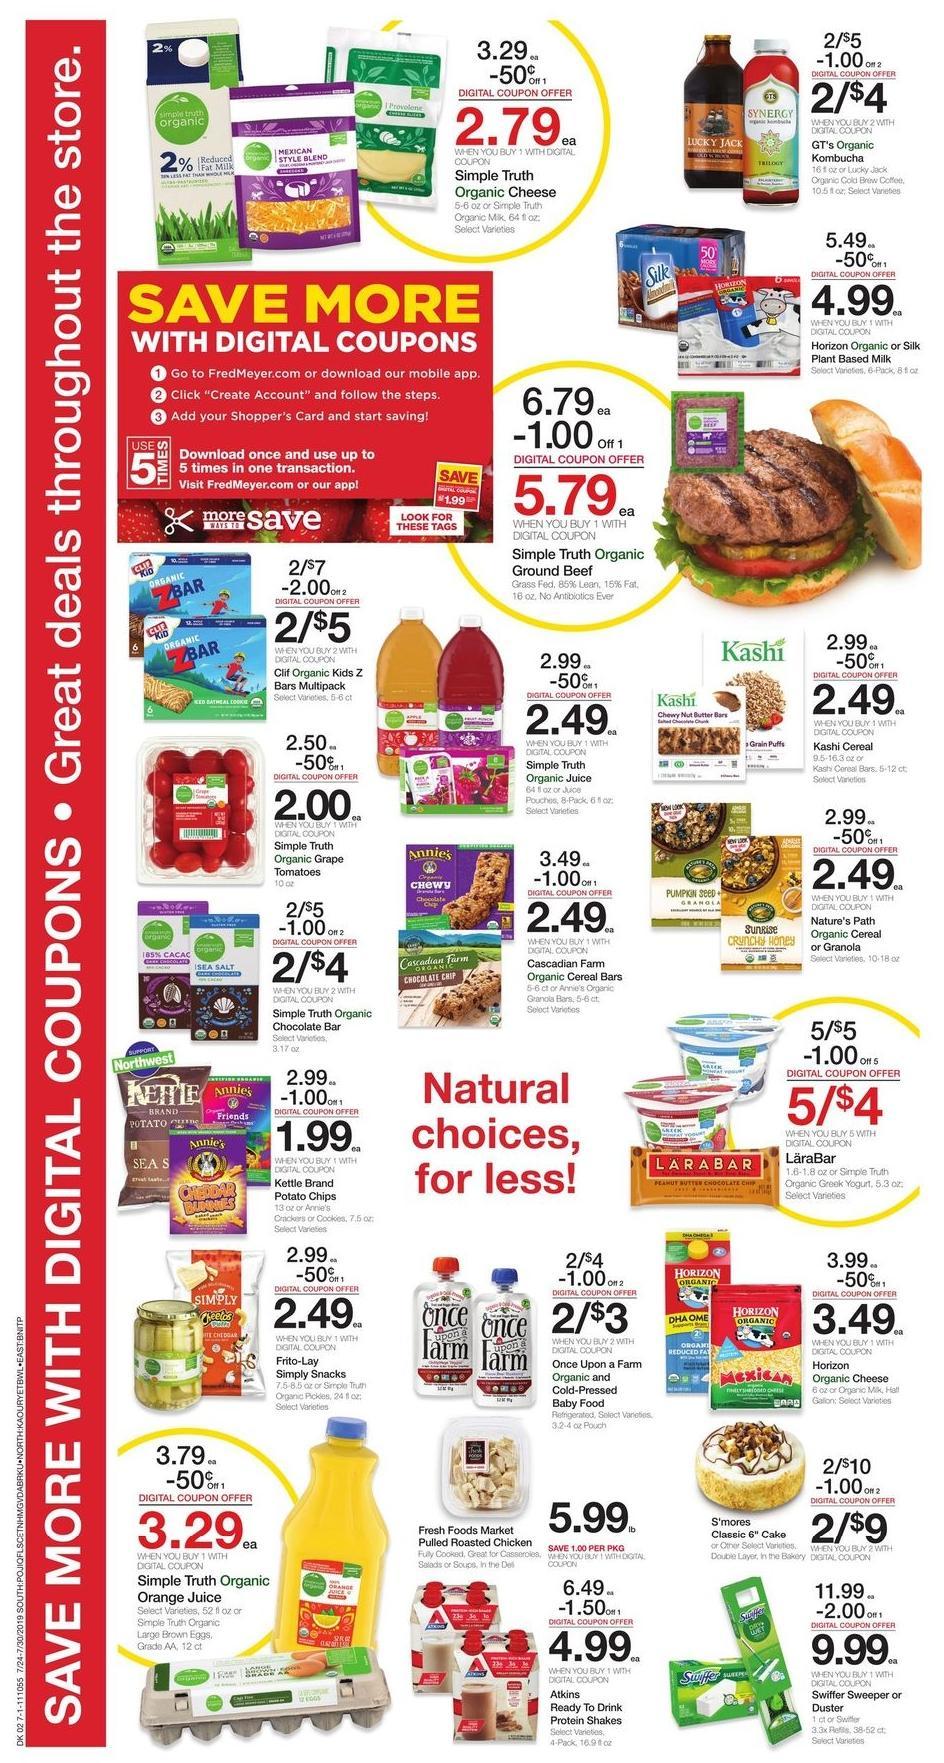 Fred Meyer Weekly Ad from July 24